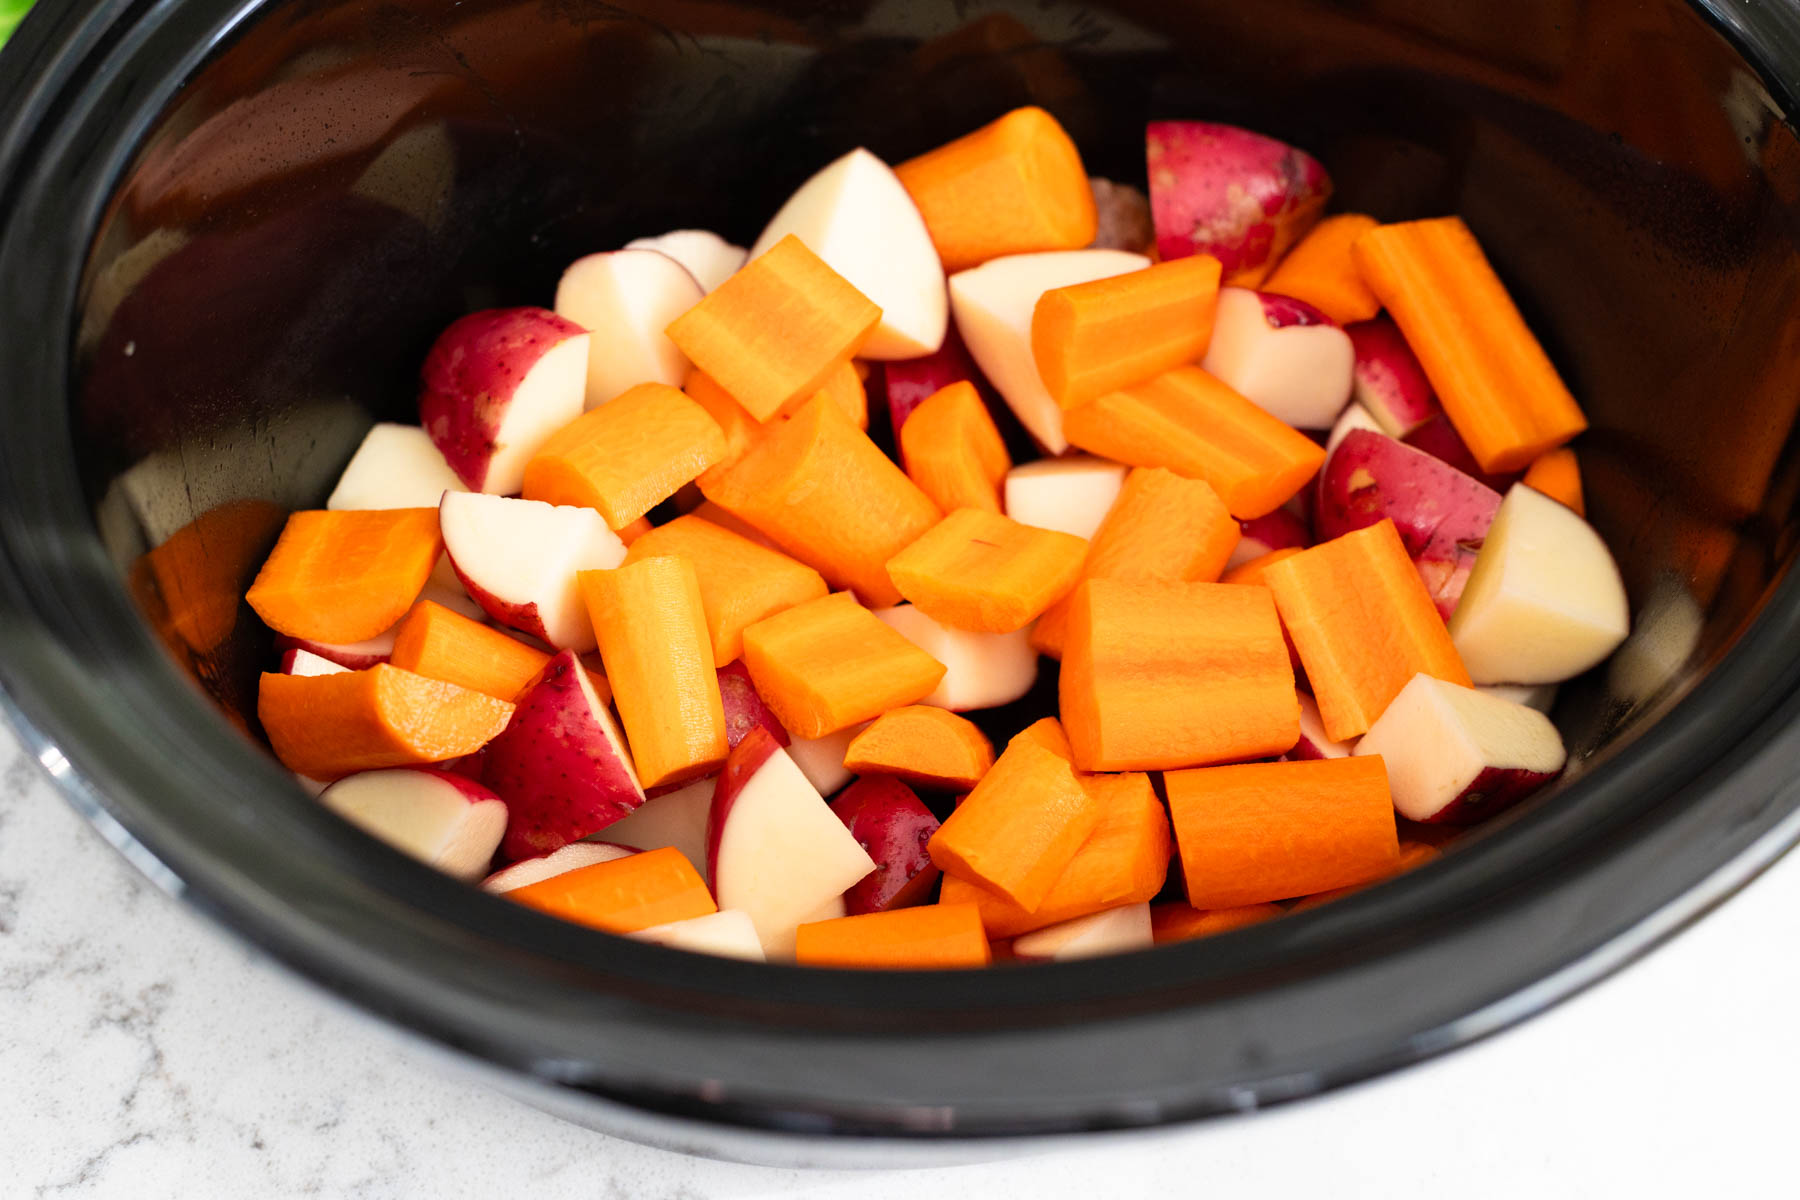 The chopped potatoes and carrots are in the slowcooker pot.